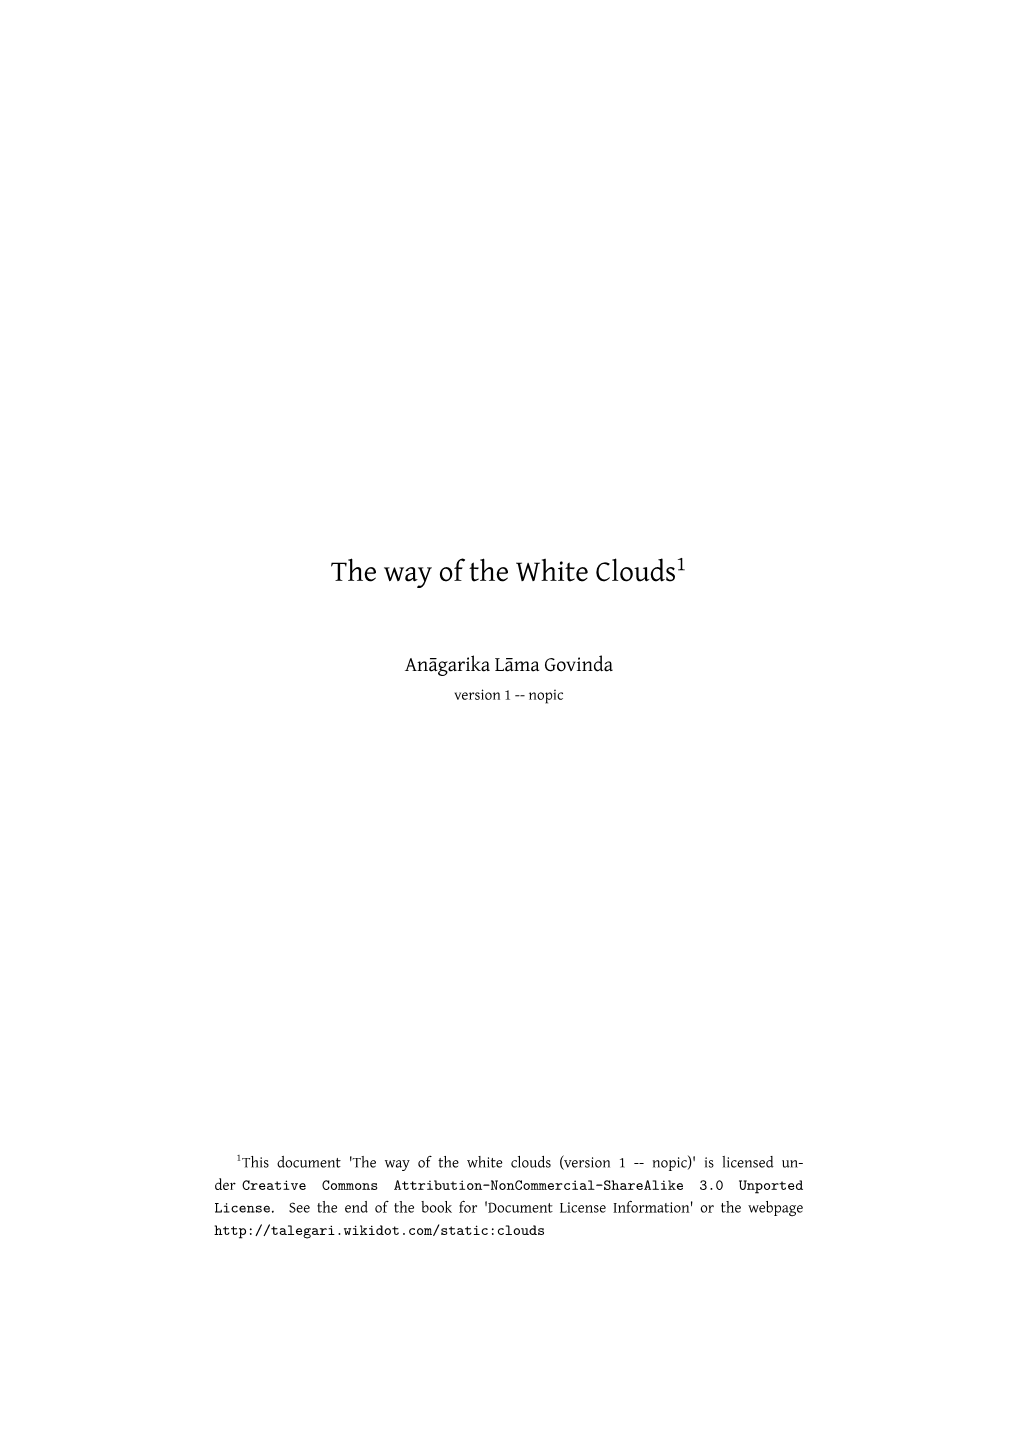 The Way of the White Clouds1